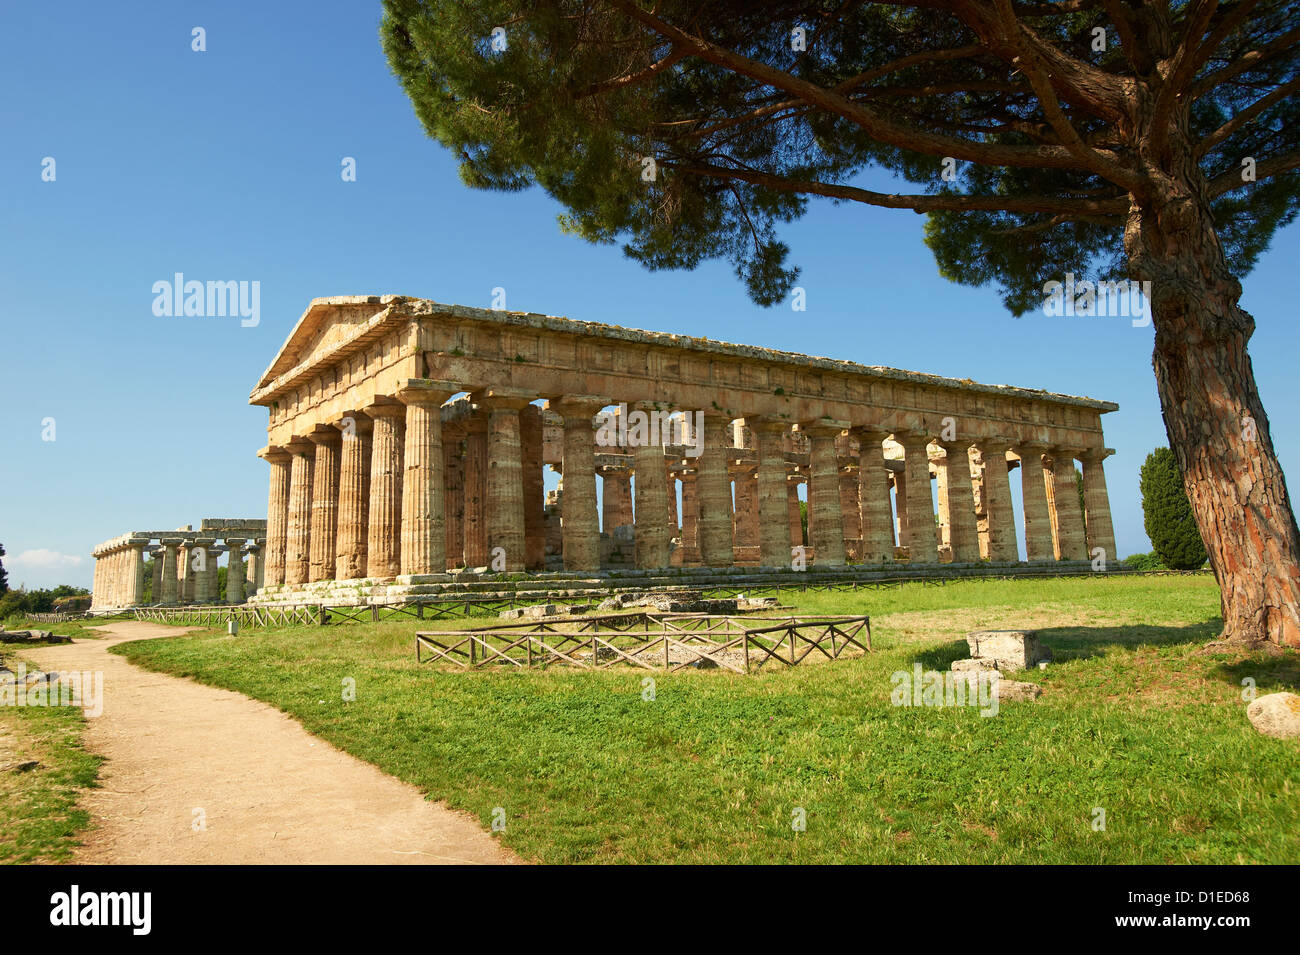 The ancient Doric Greek Temple of Hera of Paestum built in about 460–450 BC. Paestum archaeological site, Italy.  Stock Photo